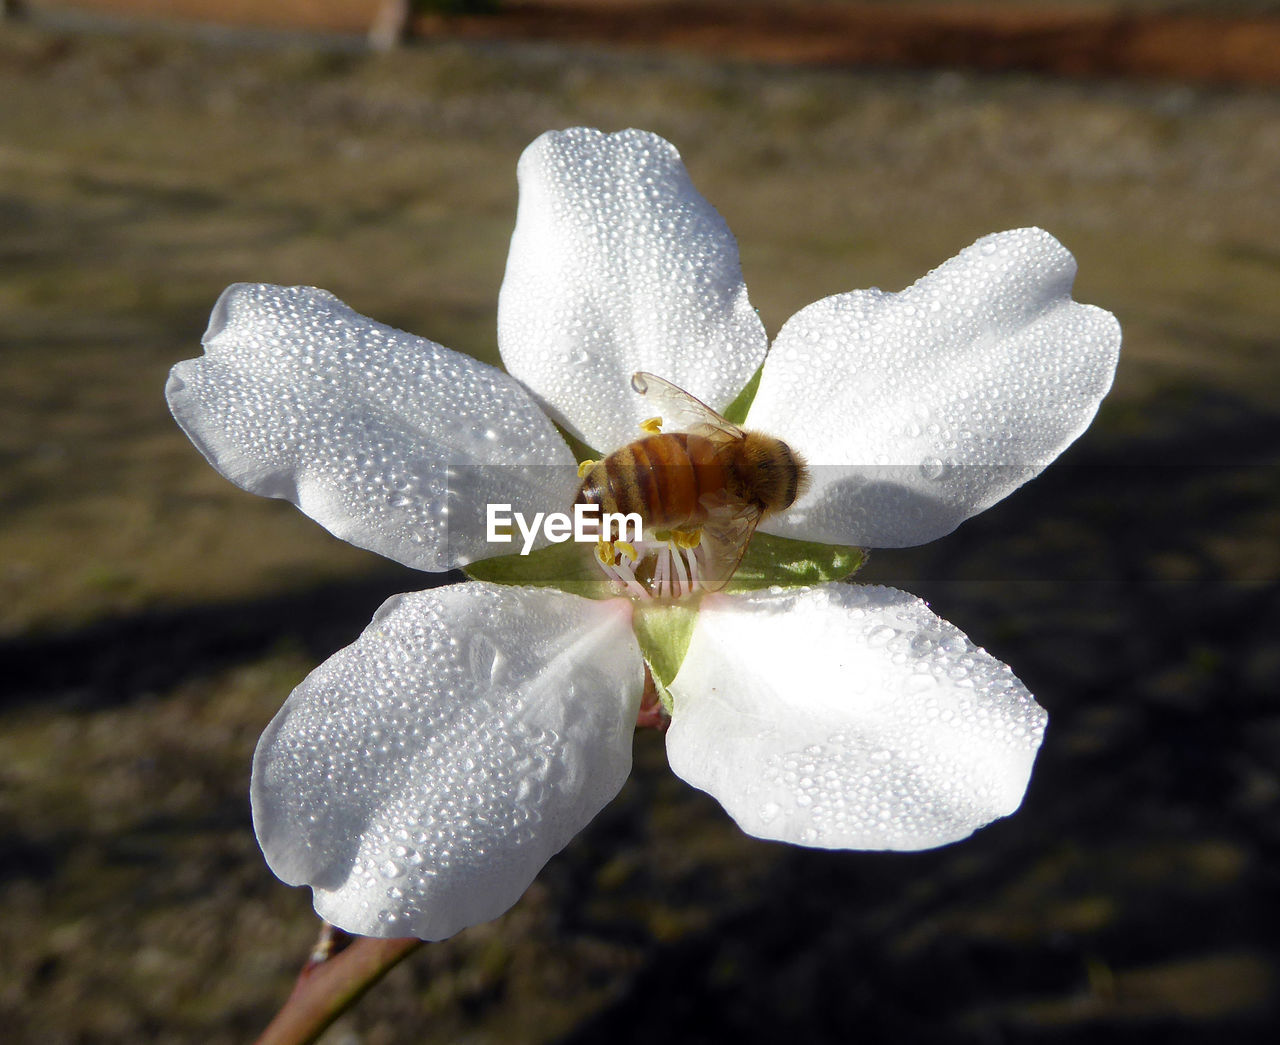 CLOSE-UP OF FLOWER BLOOMING IN WATER